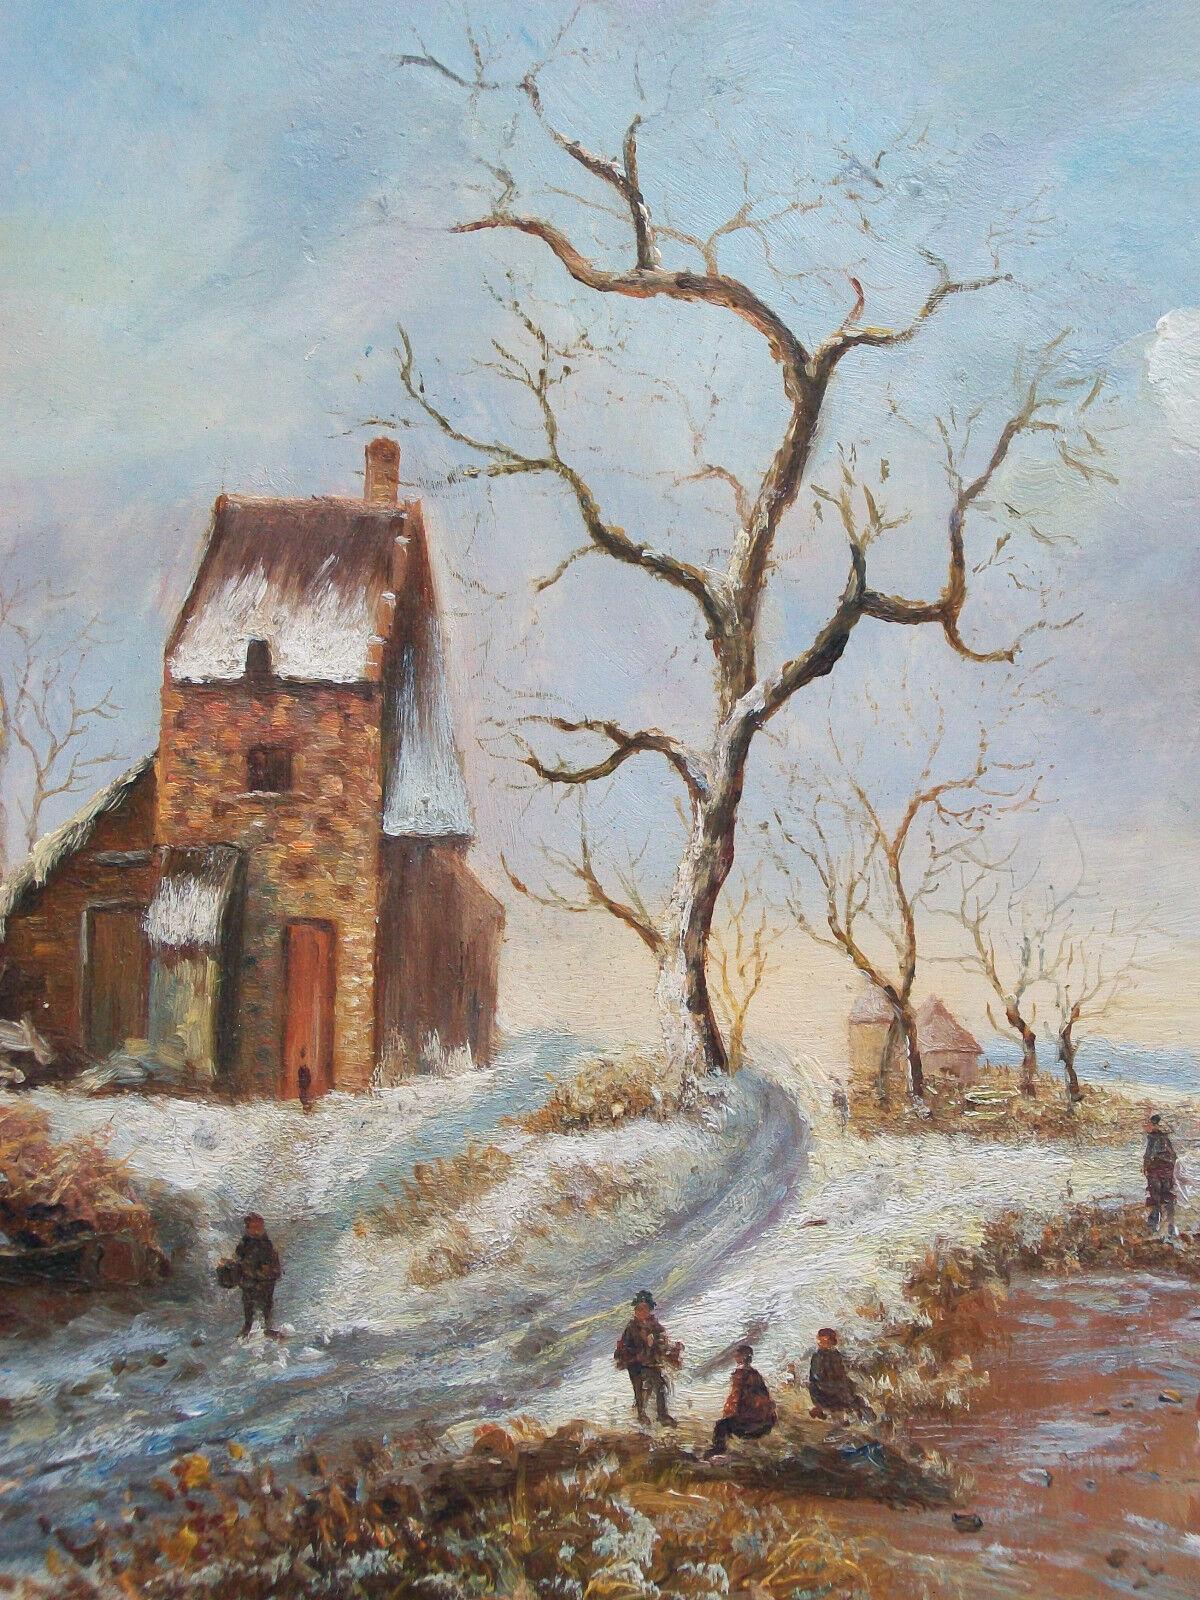 Vintage Continental winter landscape painting on panel - Dutch style - unsigned - unframed - gallery/inventory label verso - mid 20th century.

Excellent vintage condition - no loss - no damage - no restoration - unframed - uneven varnish.

Size -